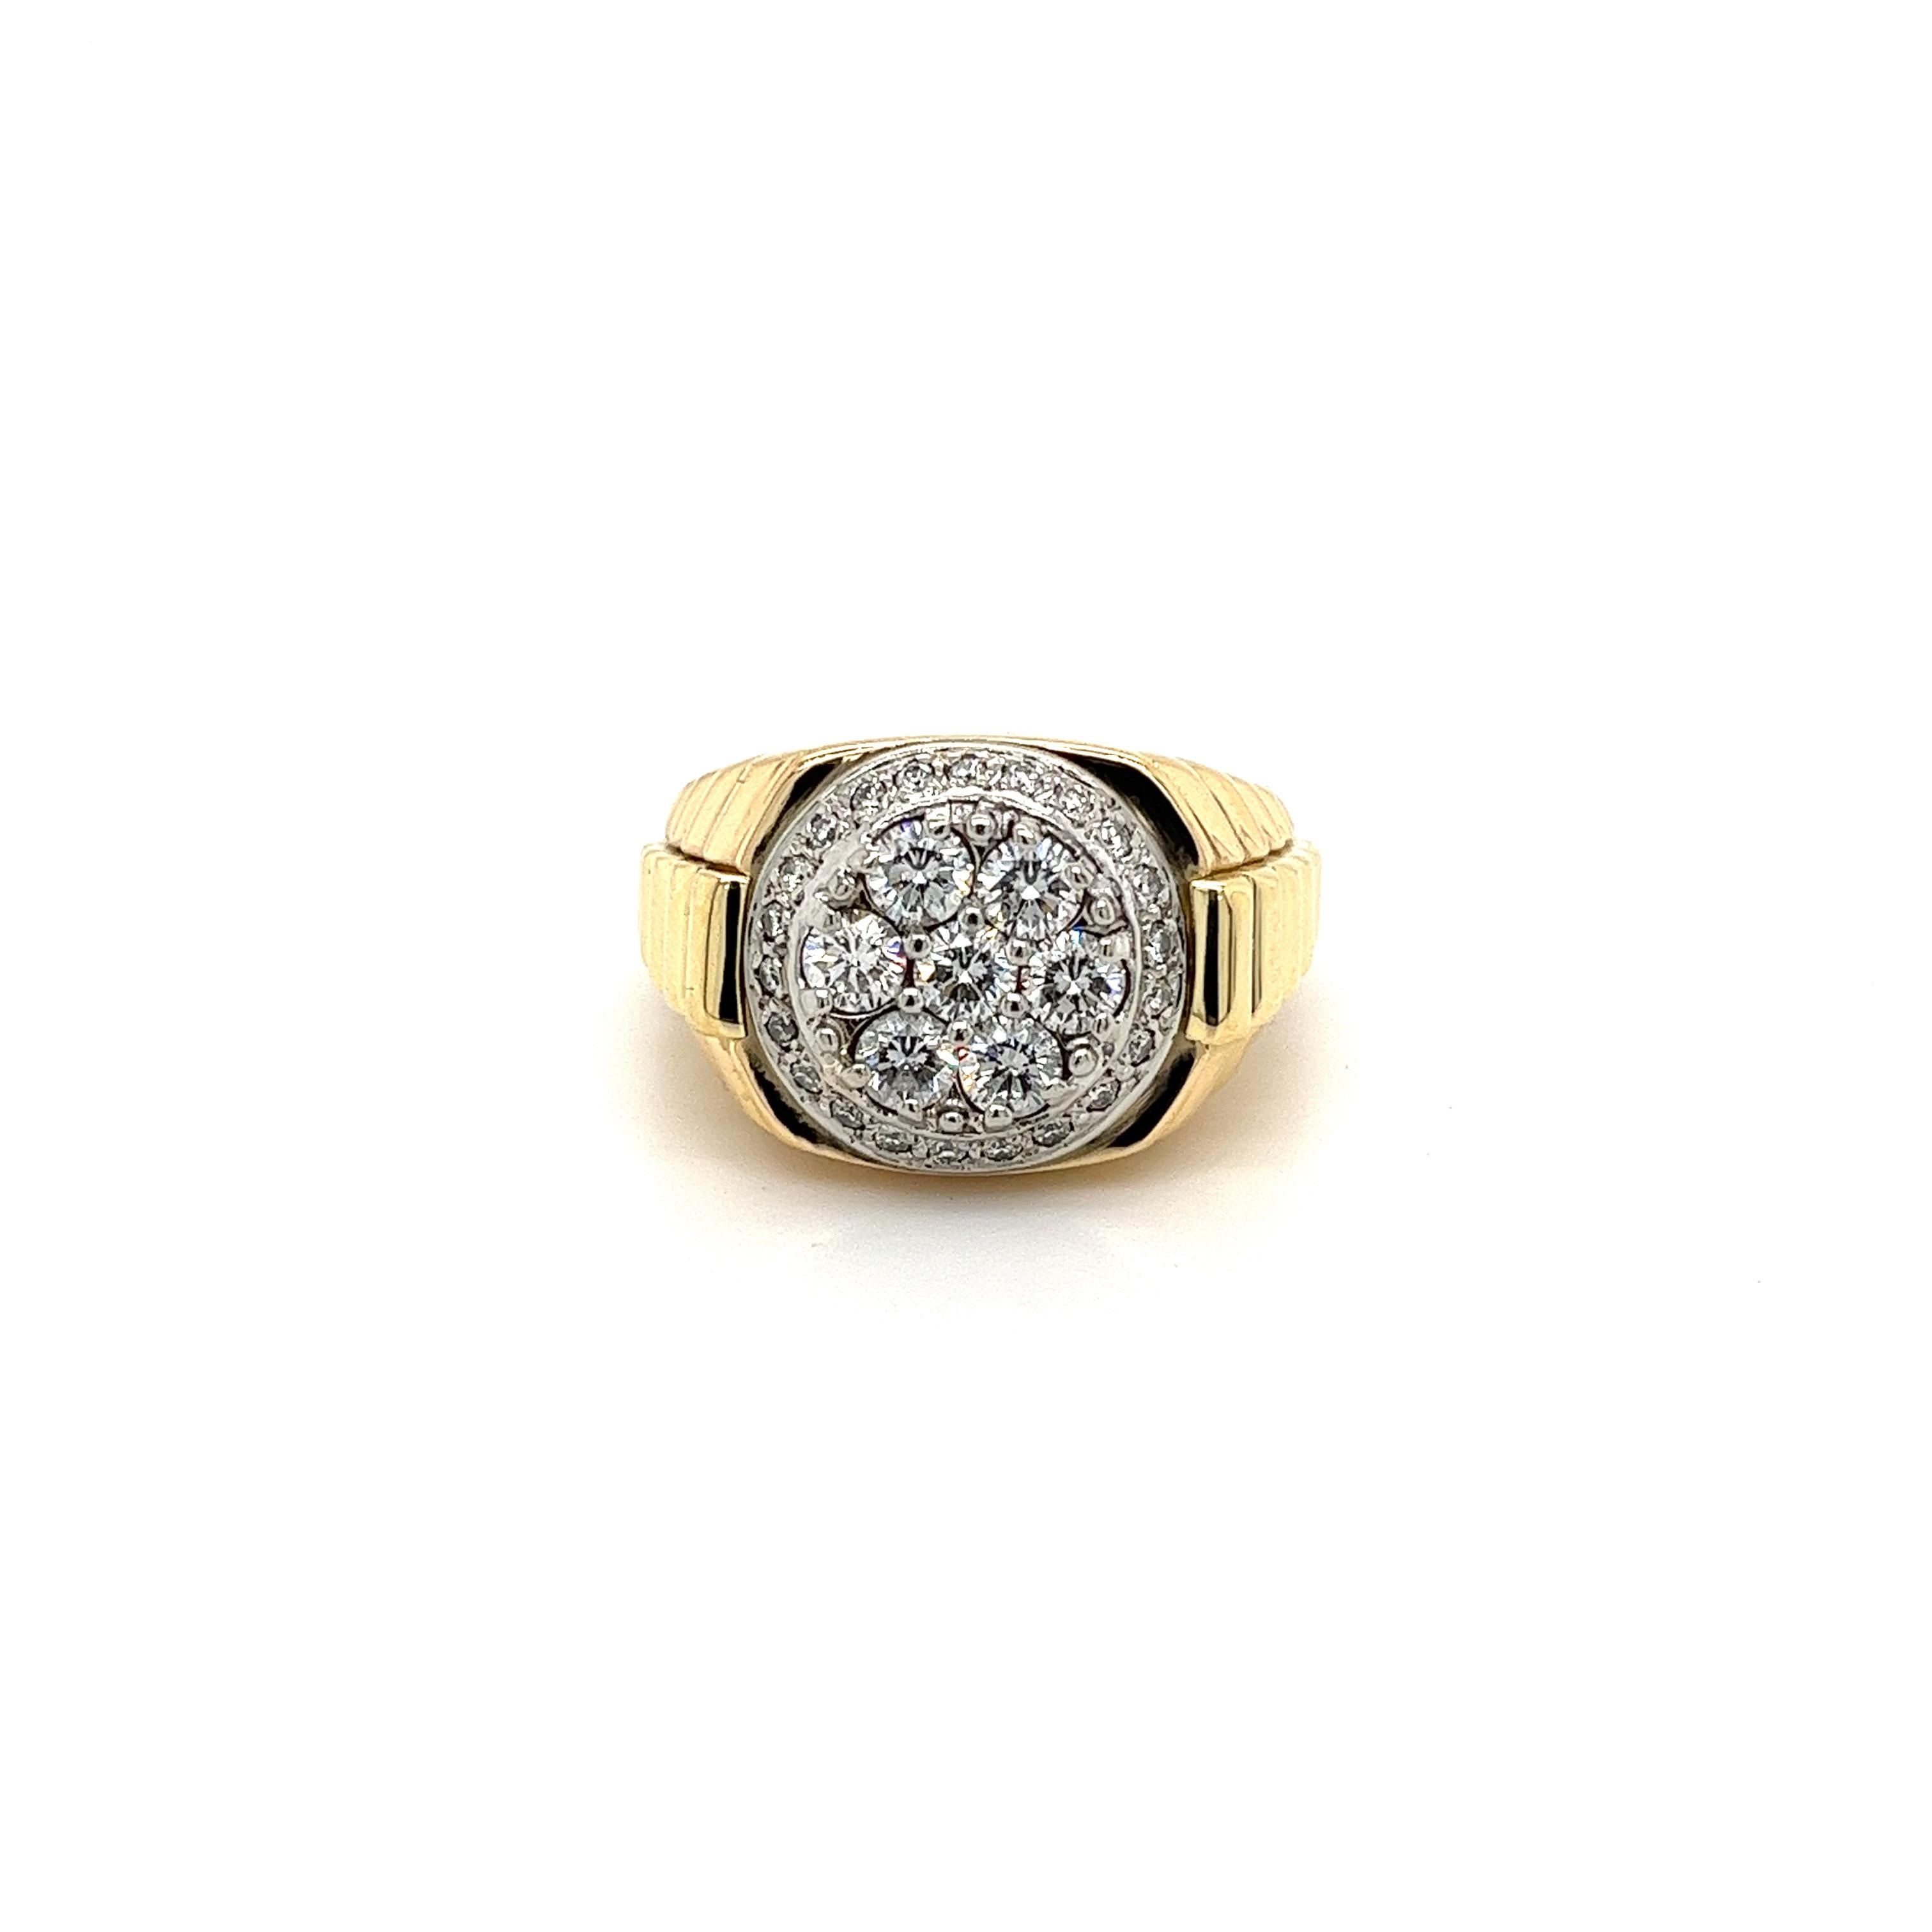 Vintage natural diamond men's ring set in 18k solid gold. Diamonds are all exceptional VS1-VS2 quality stones with equally pristine baguette-cut diamond side stones on the ring shank. Diamonds mounted in a classic vintage 18k gold 